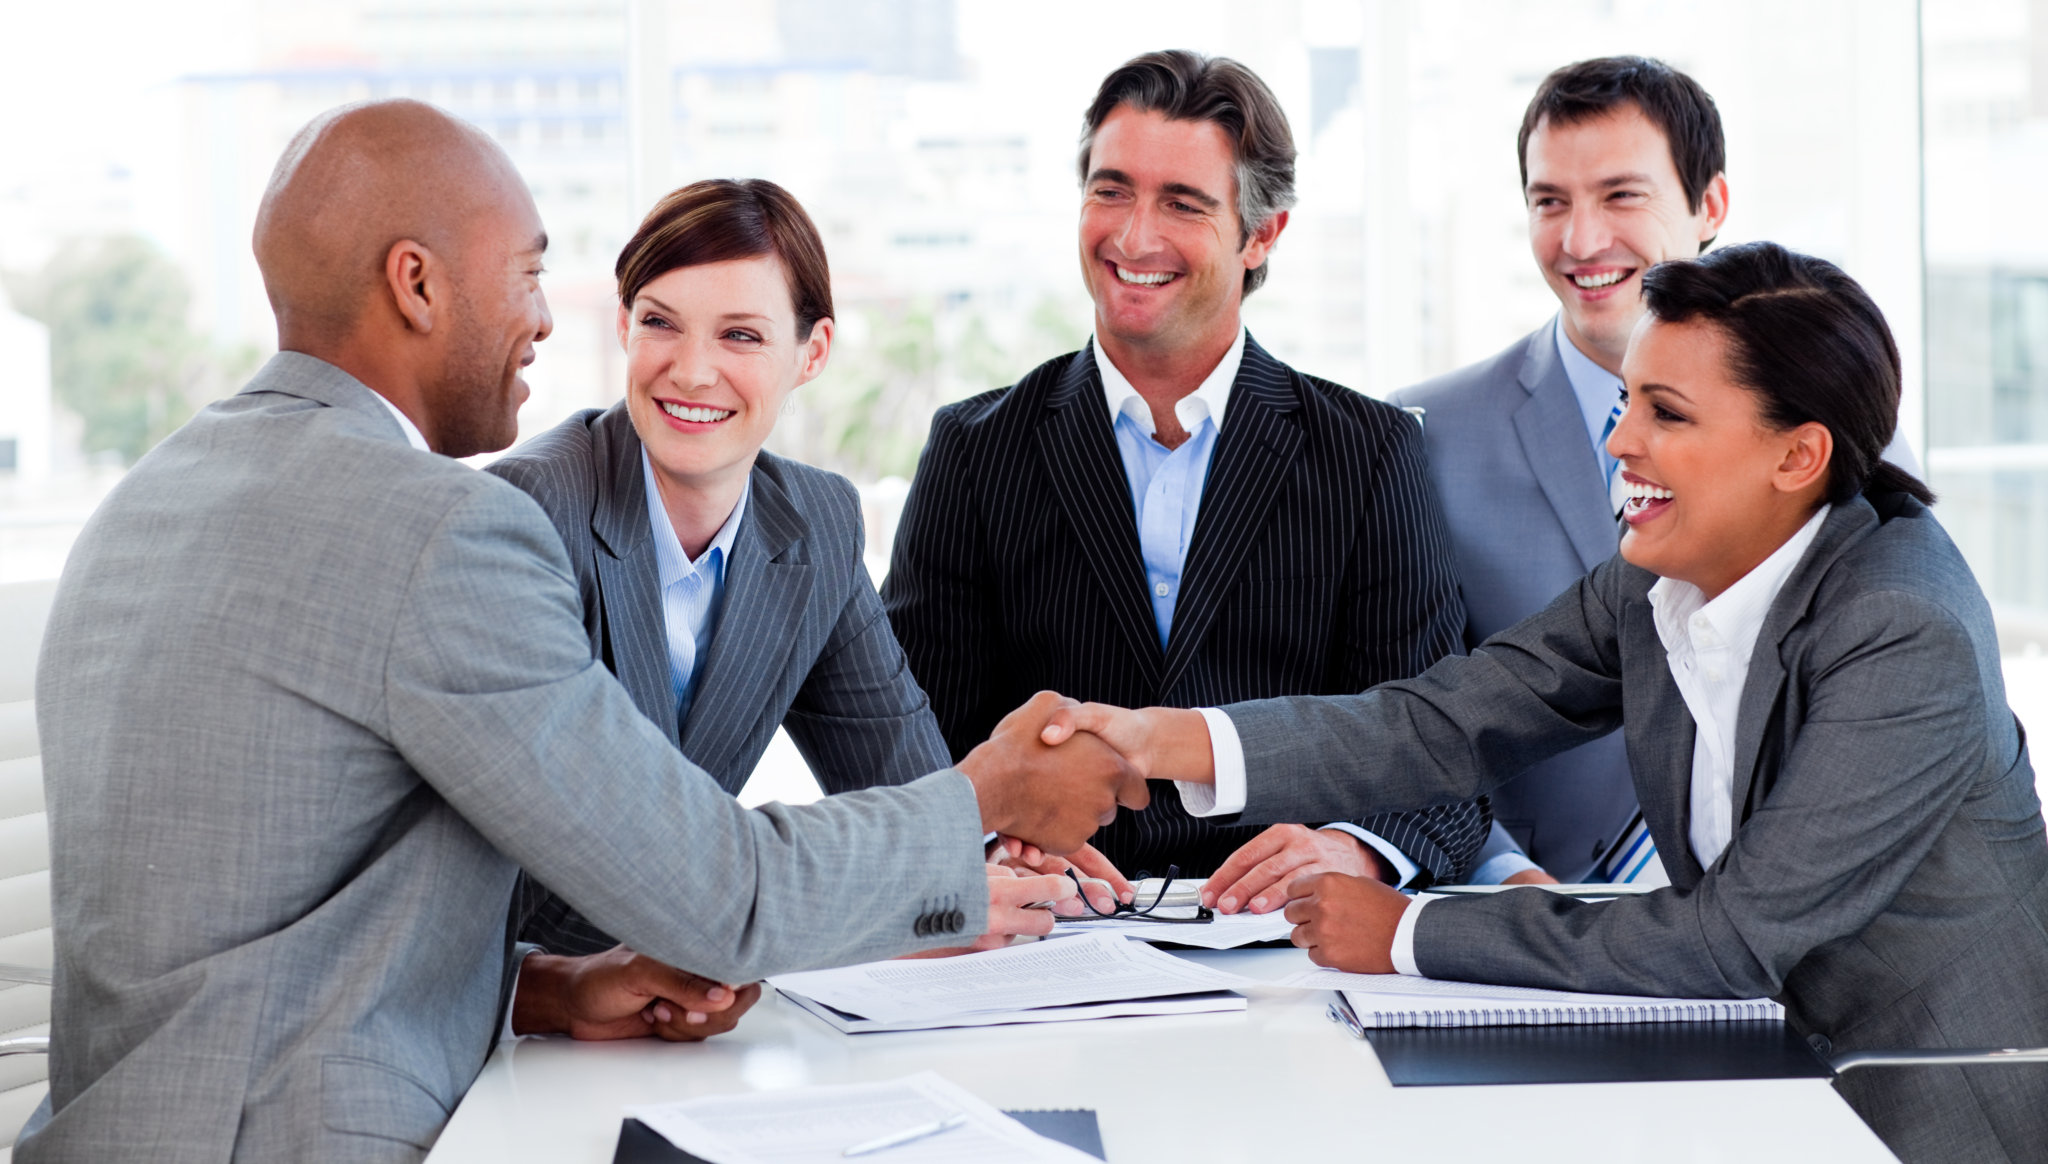 6 Must-Haves for a Great Sales Meeting